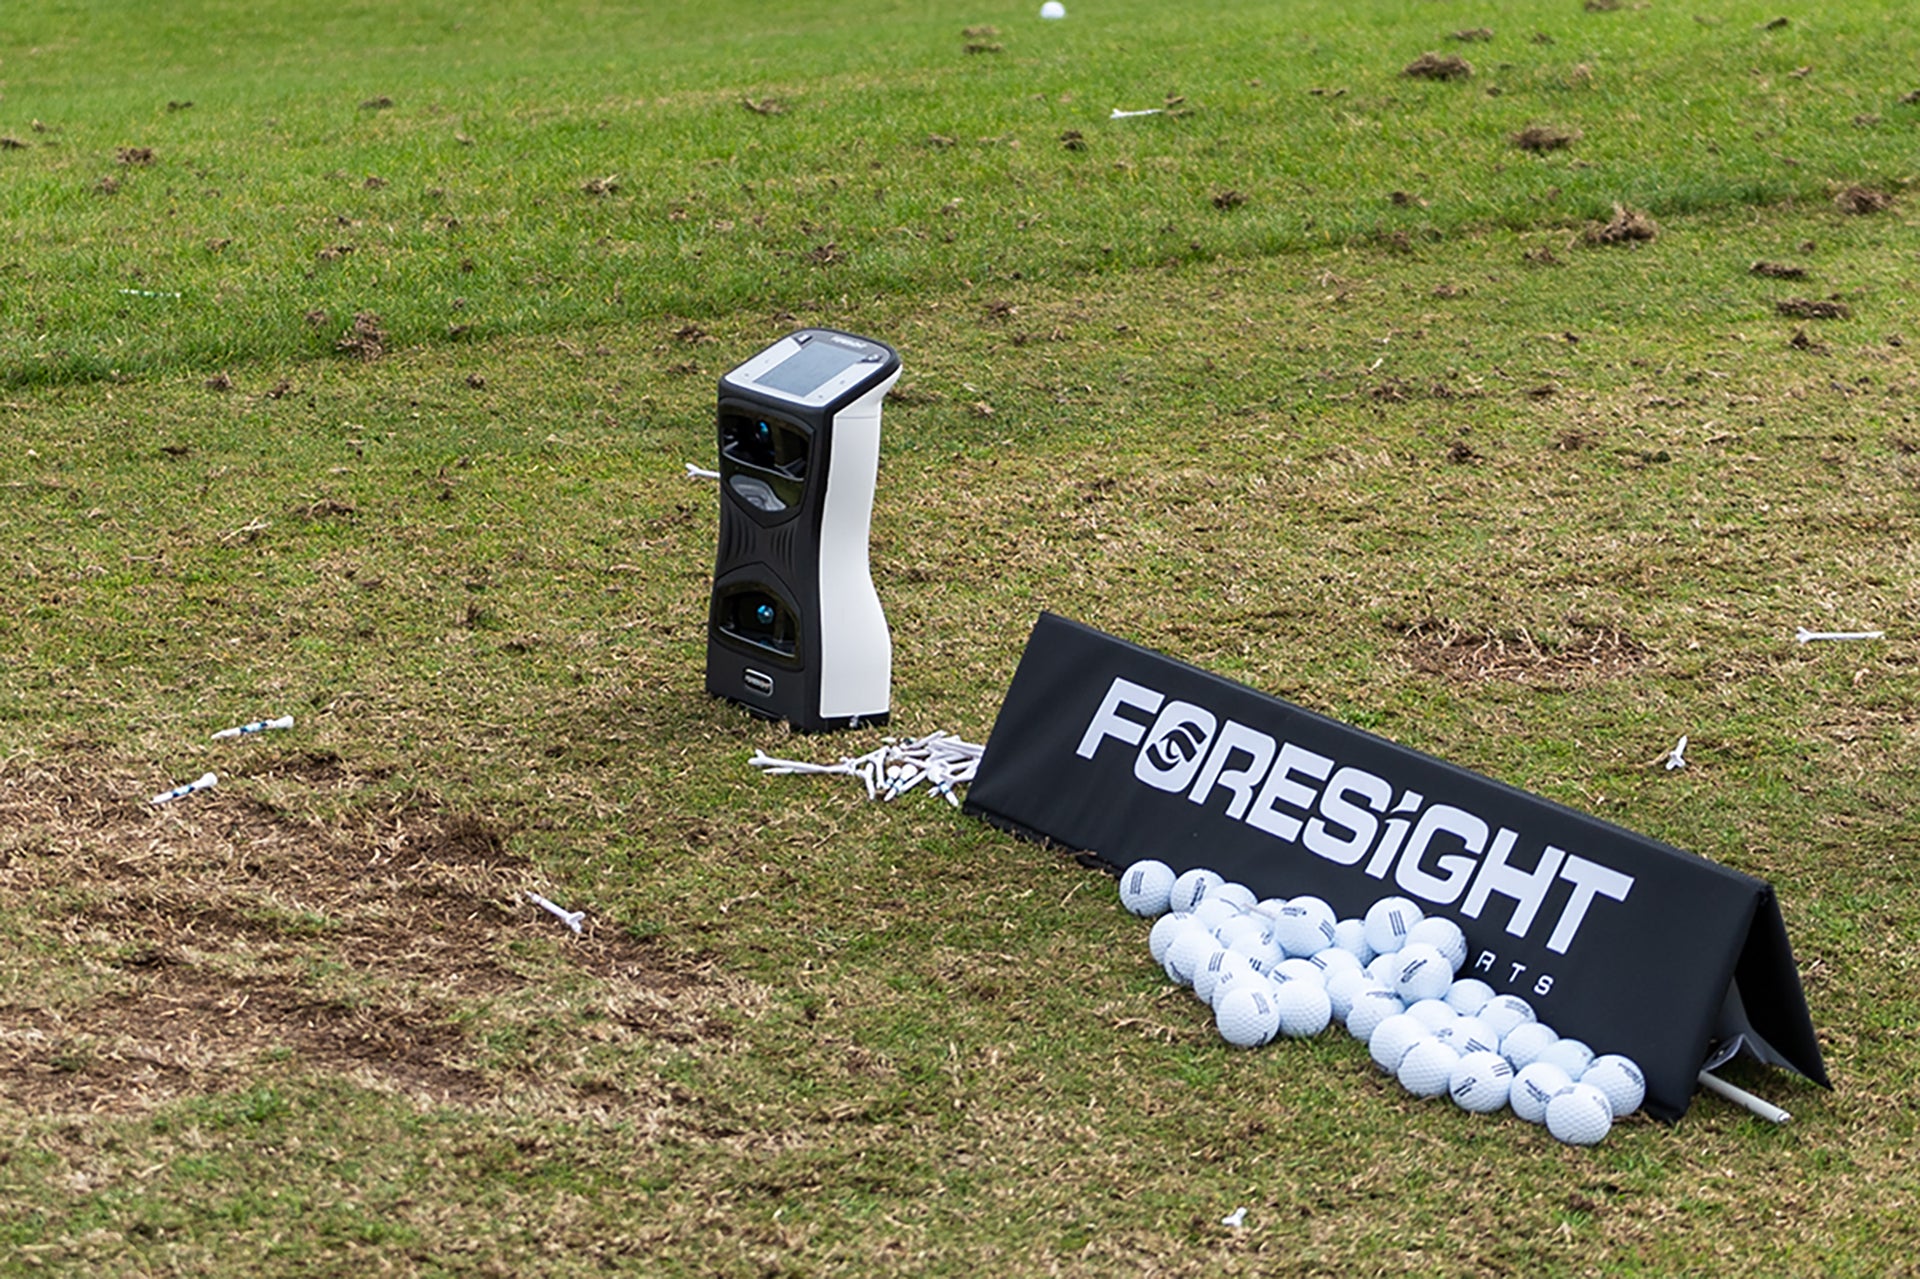 The Foresight Sports QuadMAX on the driving range next to a Foresight sign and a bunch of golf balls